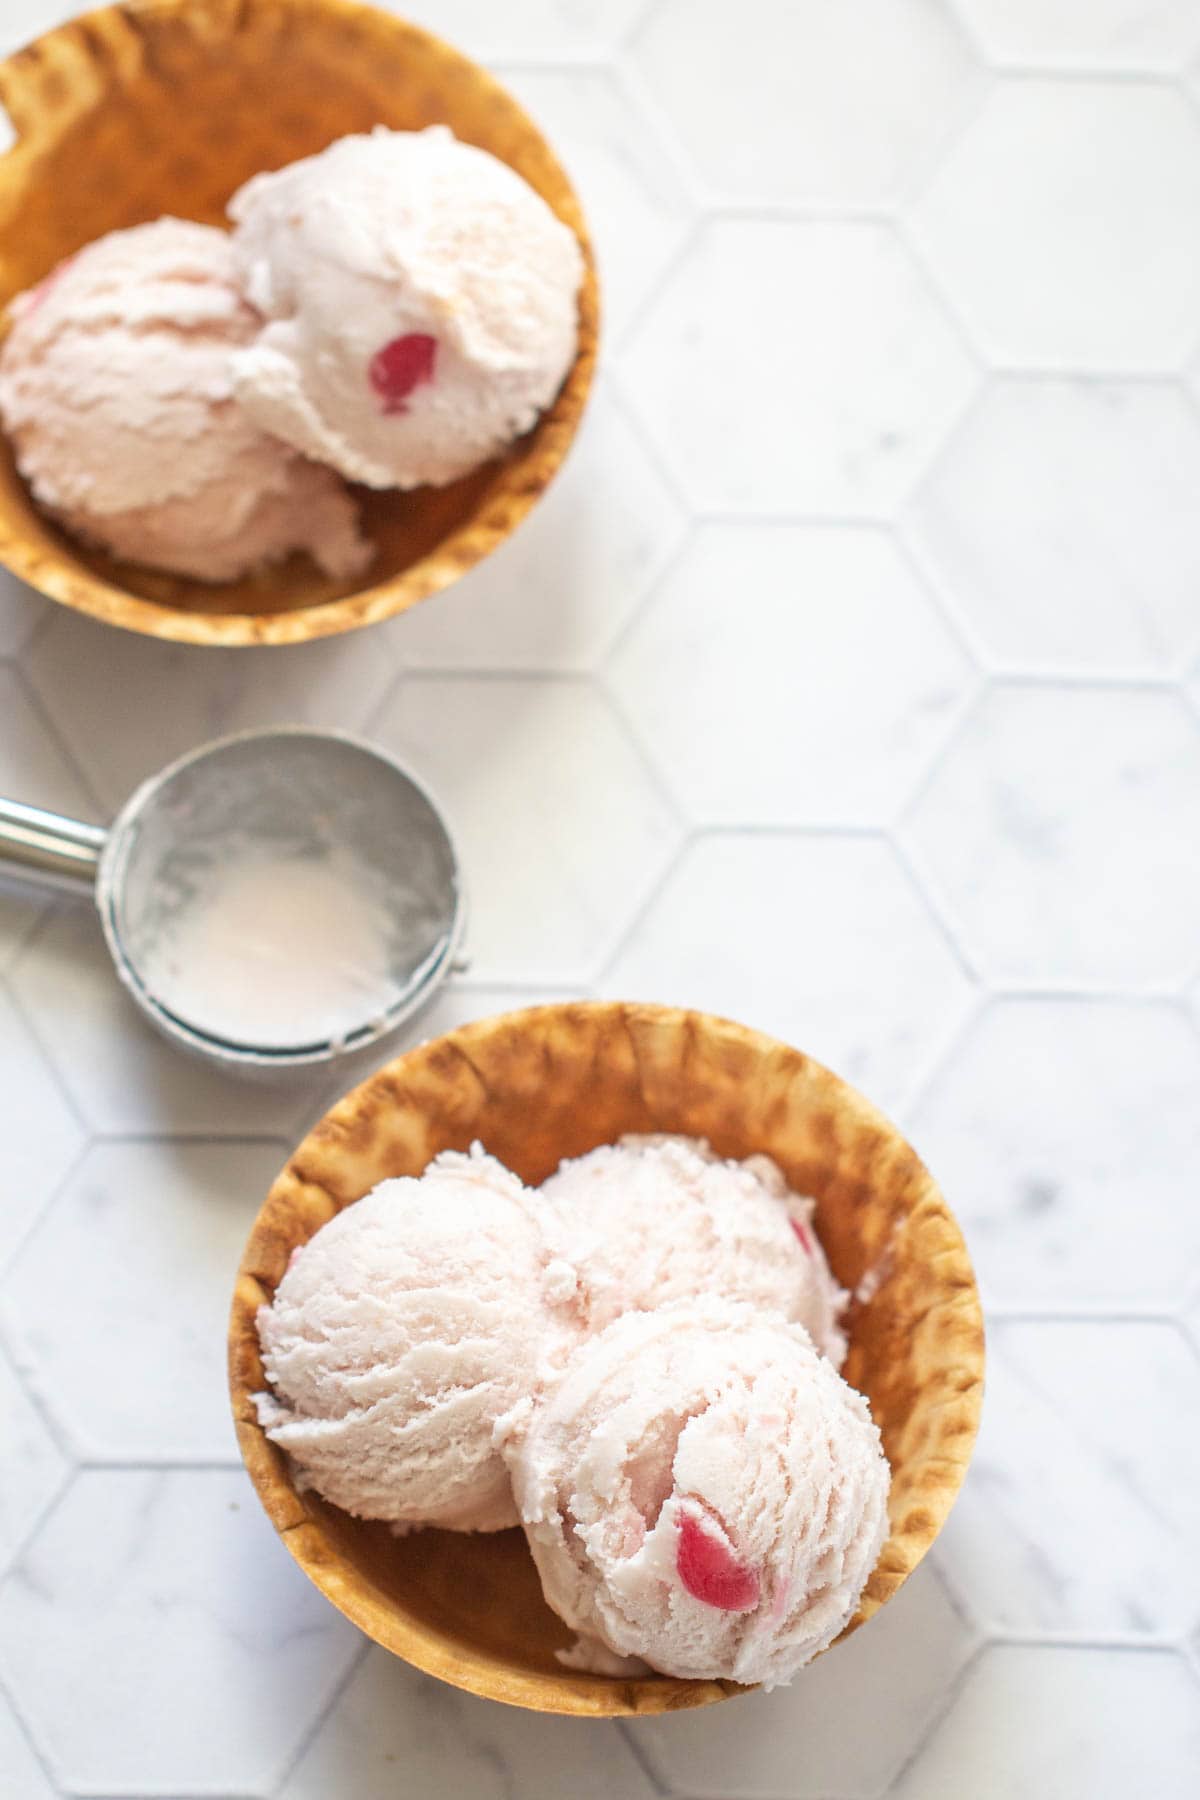 Two waffle bowls with scoops of cherry ice cream and cherry pieces, along with an ice cream scooper on a hexagon-tiled white surface.